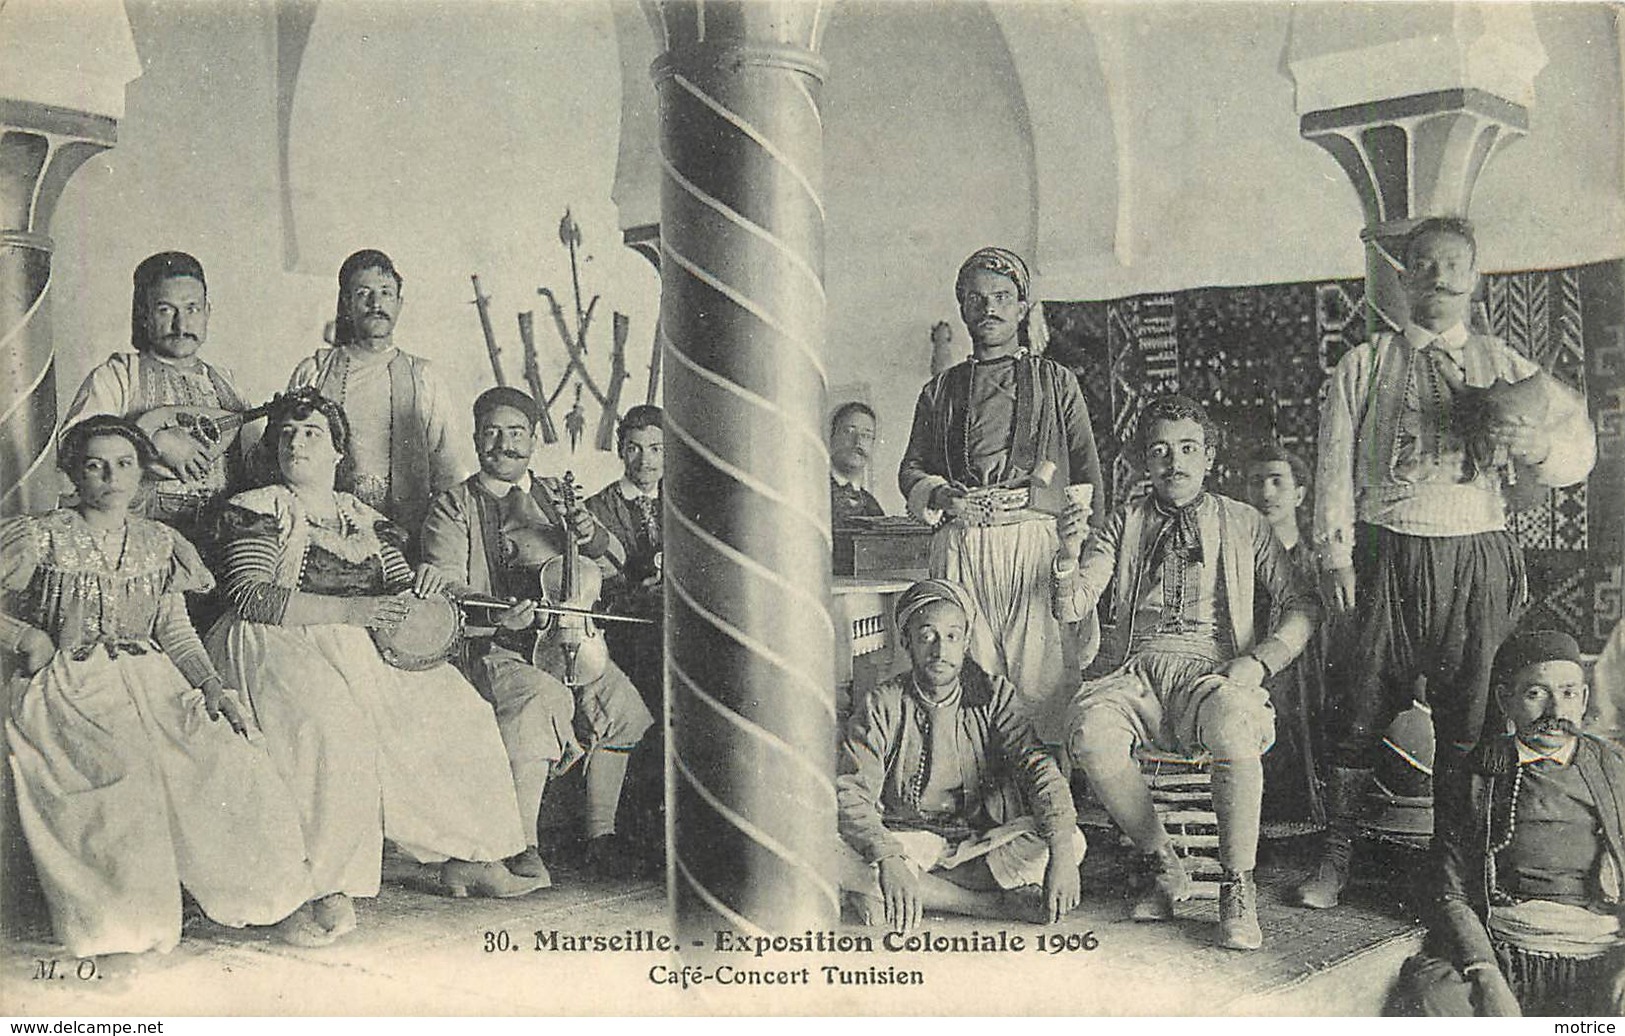 MARSEILLE - Exposition Coloniale 1906, Café Concert Tunisien. - Electrical Trade Shows And Other